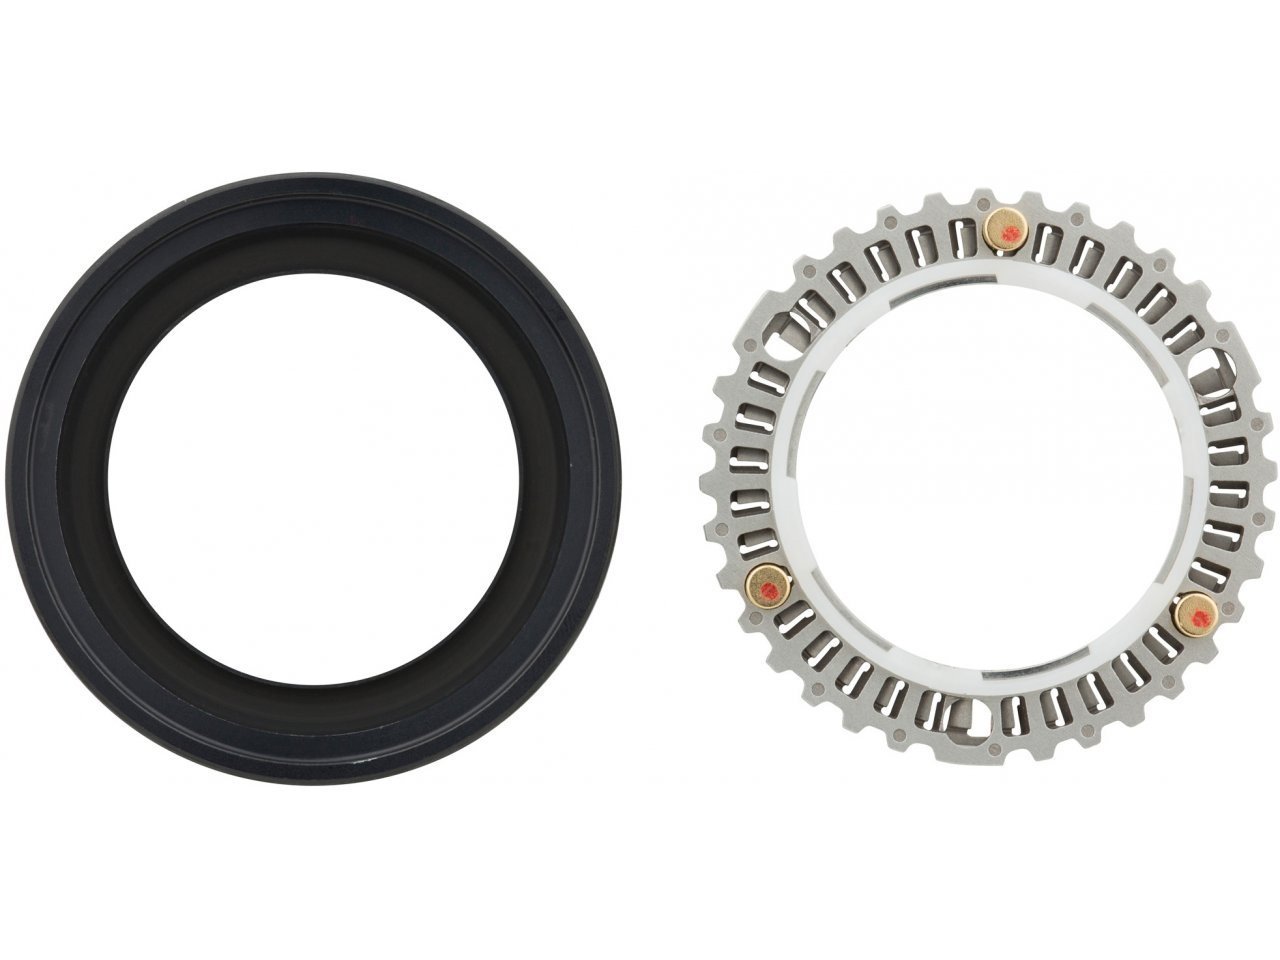 WHEEL CLUTCH ASSEMBLY AND SEAL FOR REAR ZIPP COGNITION NSW DISC BRAKE / RIM BRAKE GENERATI